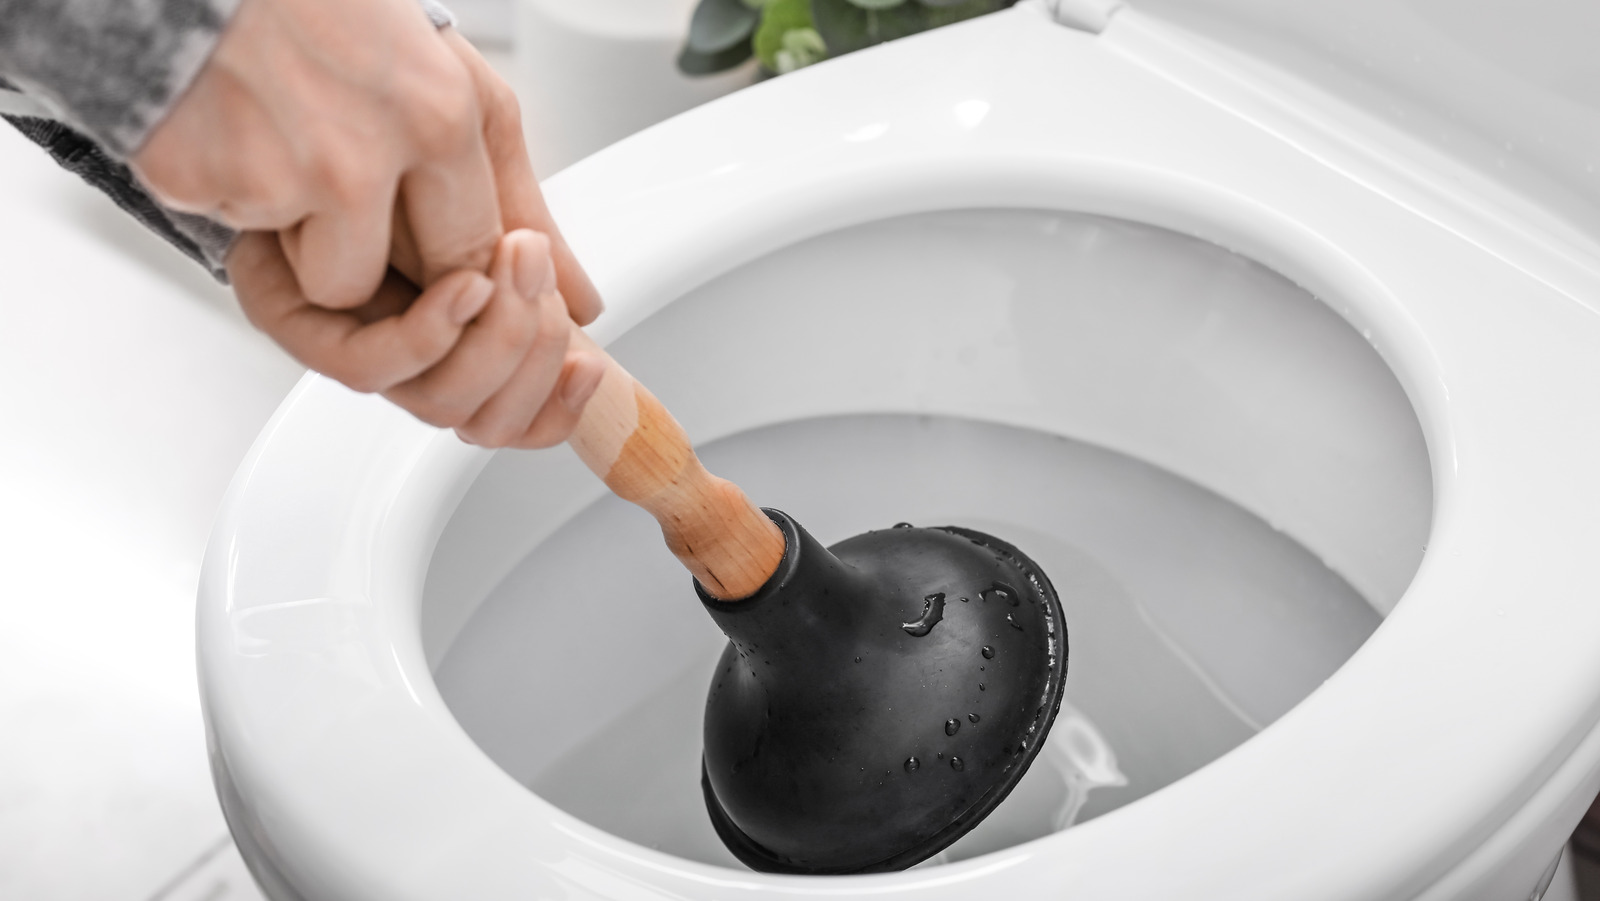 https://www.housedigest.com/img/gallery/the-best-toilet-plungers-to-make-clearing-stubborn-clogs-a-breeze/l-intro-1695653035.jpg